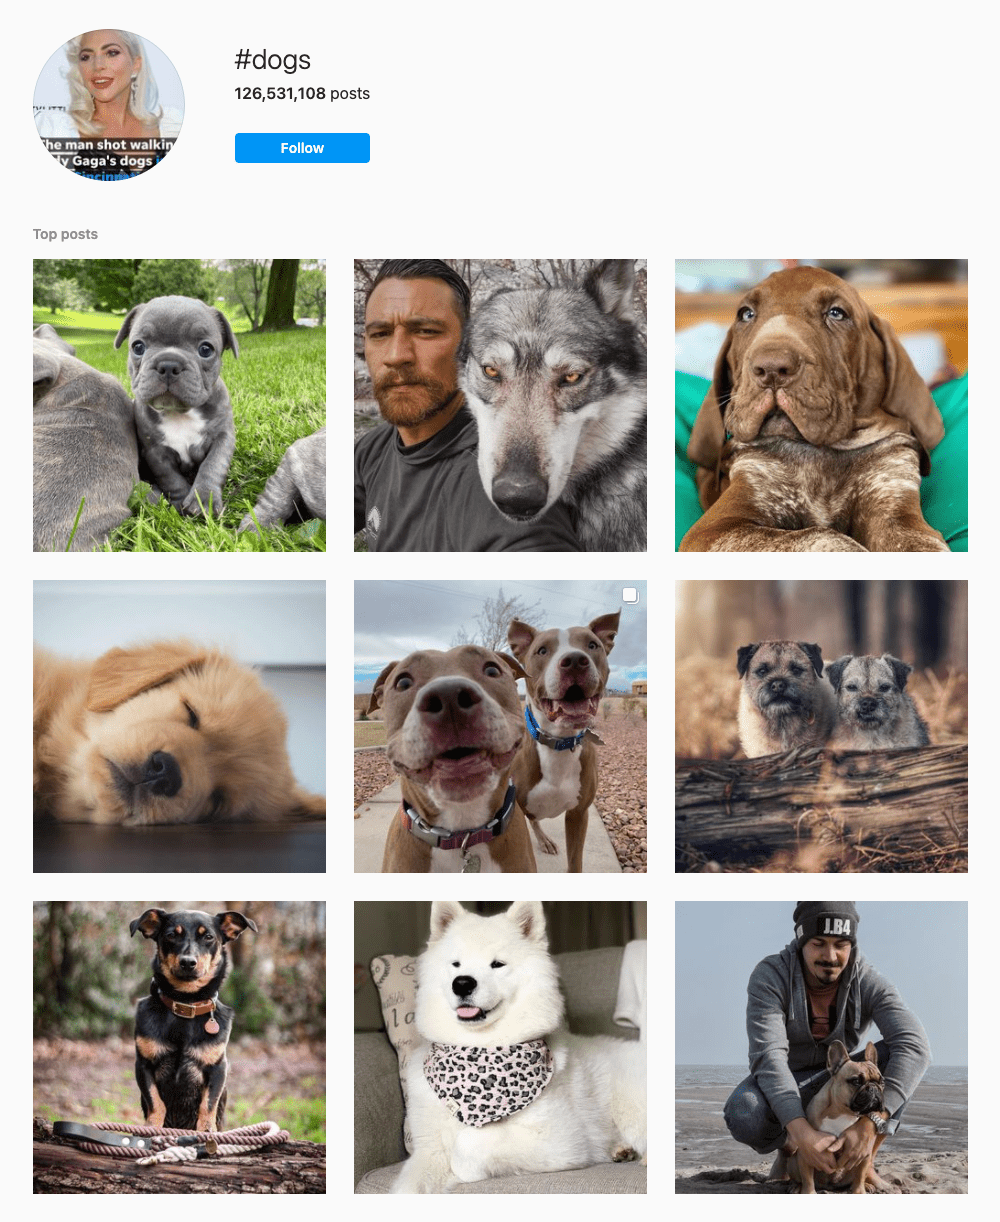 Instagram explore page for the hashtag #dogs.